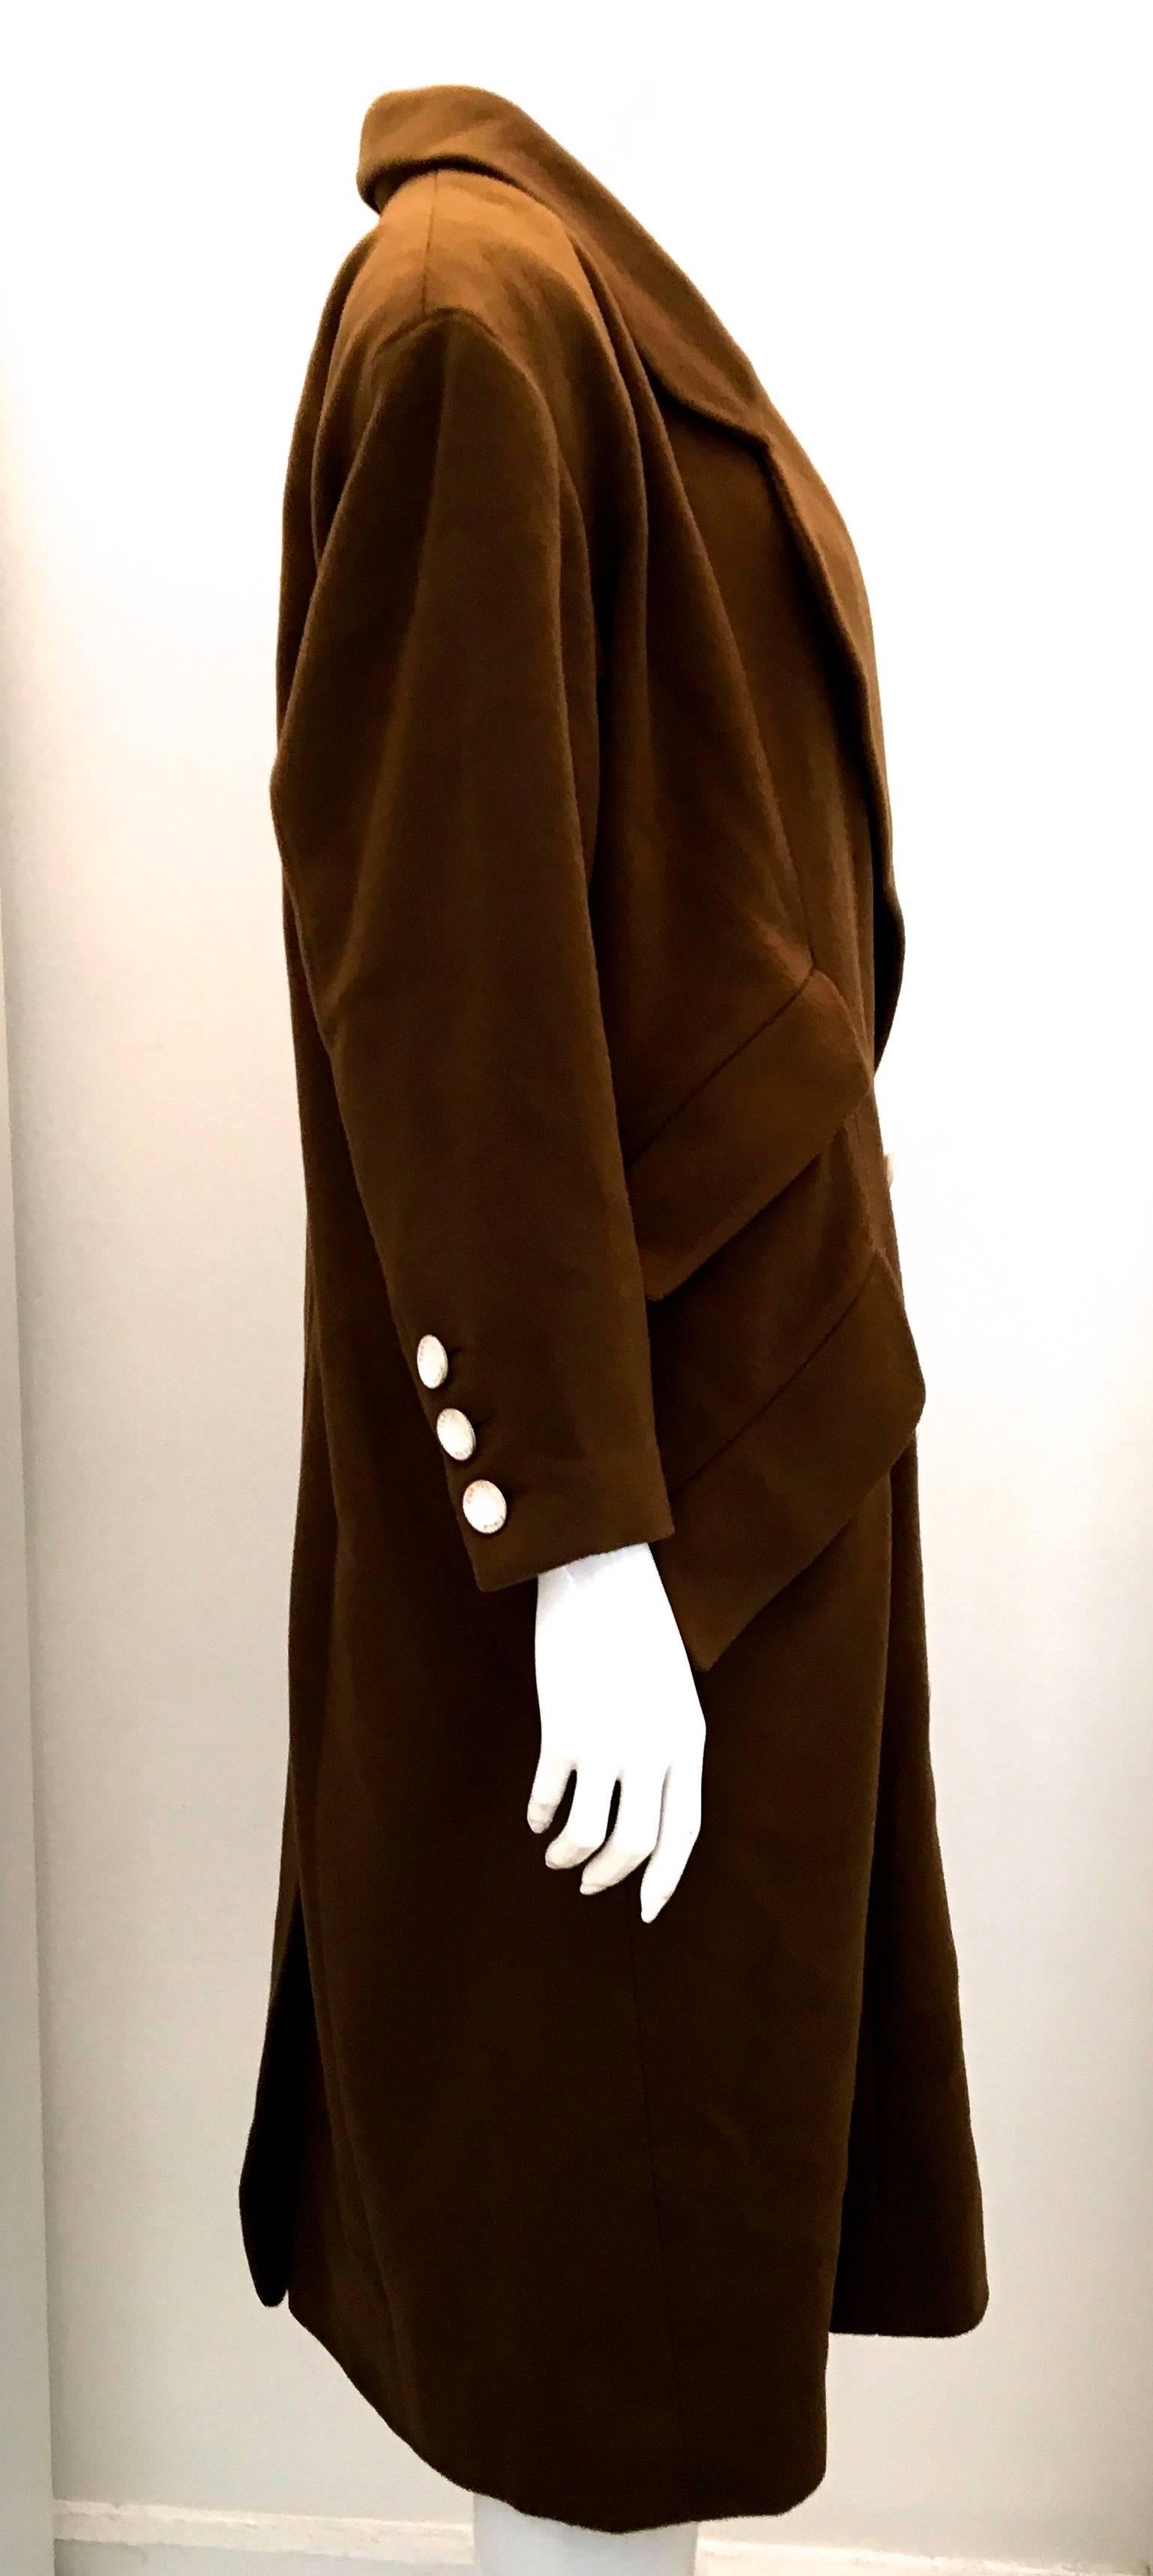 Women's Chanel Tobacco Brown Cashmere Coat with Enamel Buttons 